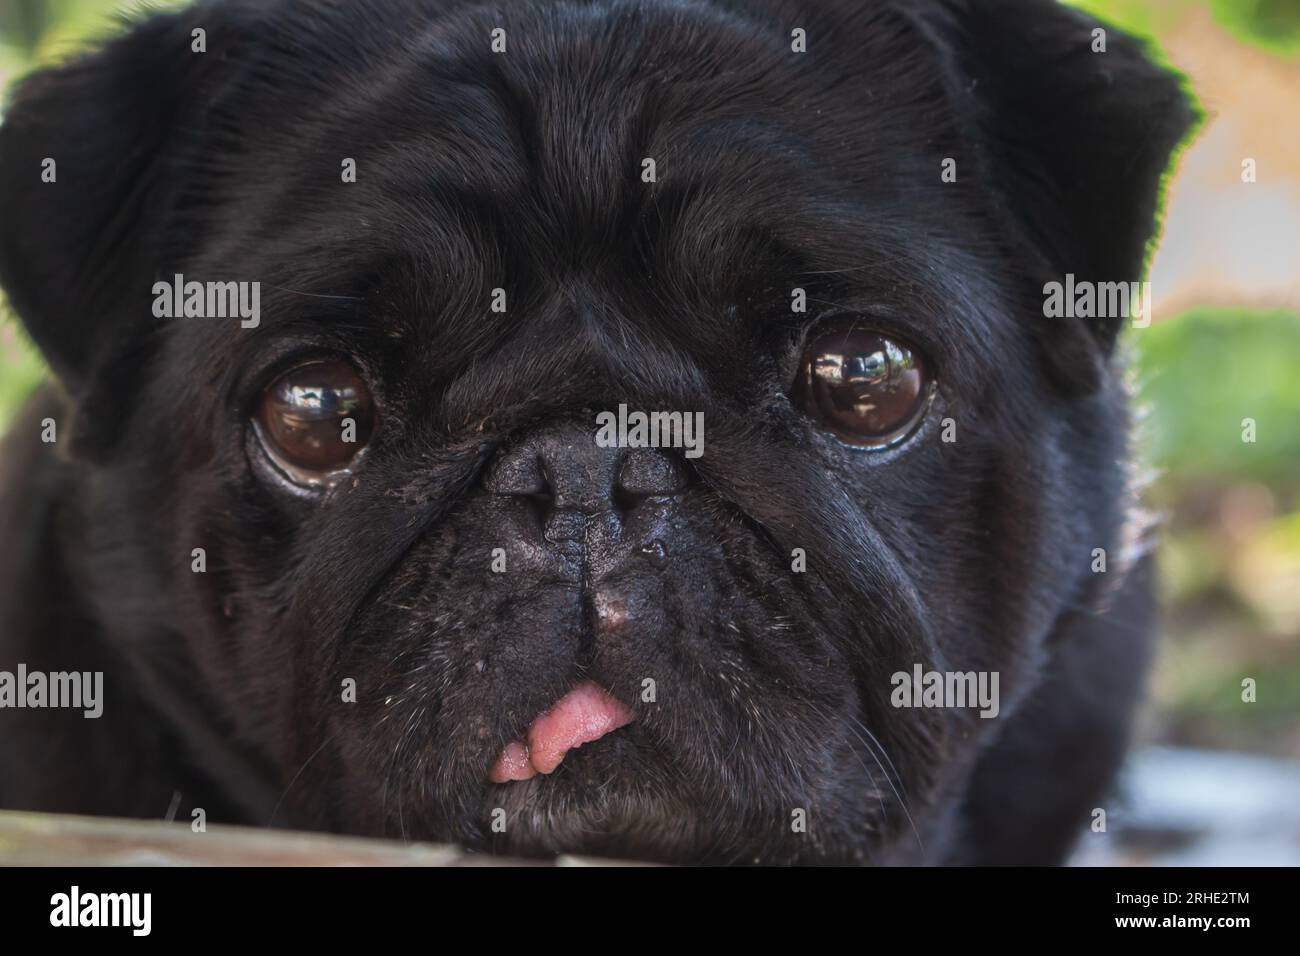 Black pug portrait. Funny dog face. Best human friend. Domestic dogs concept. Black pug looking at camera. Adorable lazy pug. Small black dog. Stock Photo